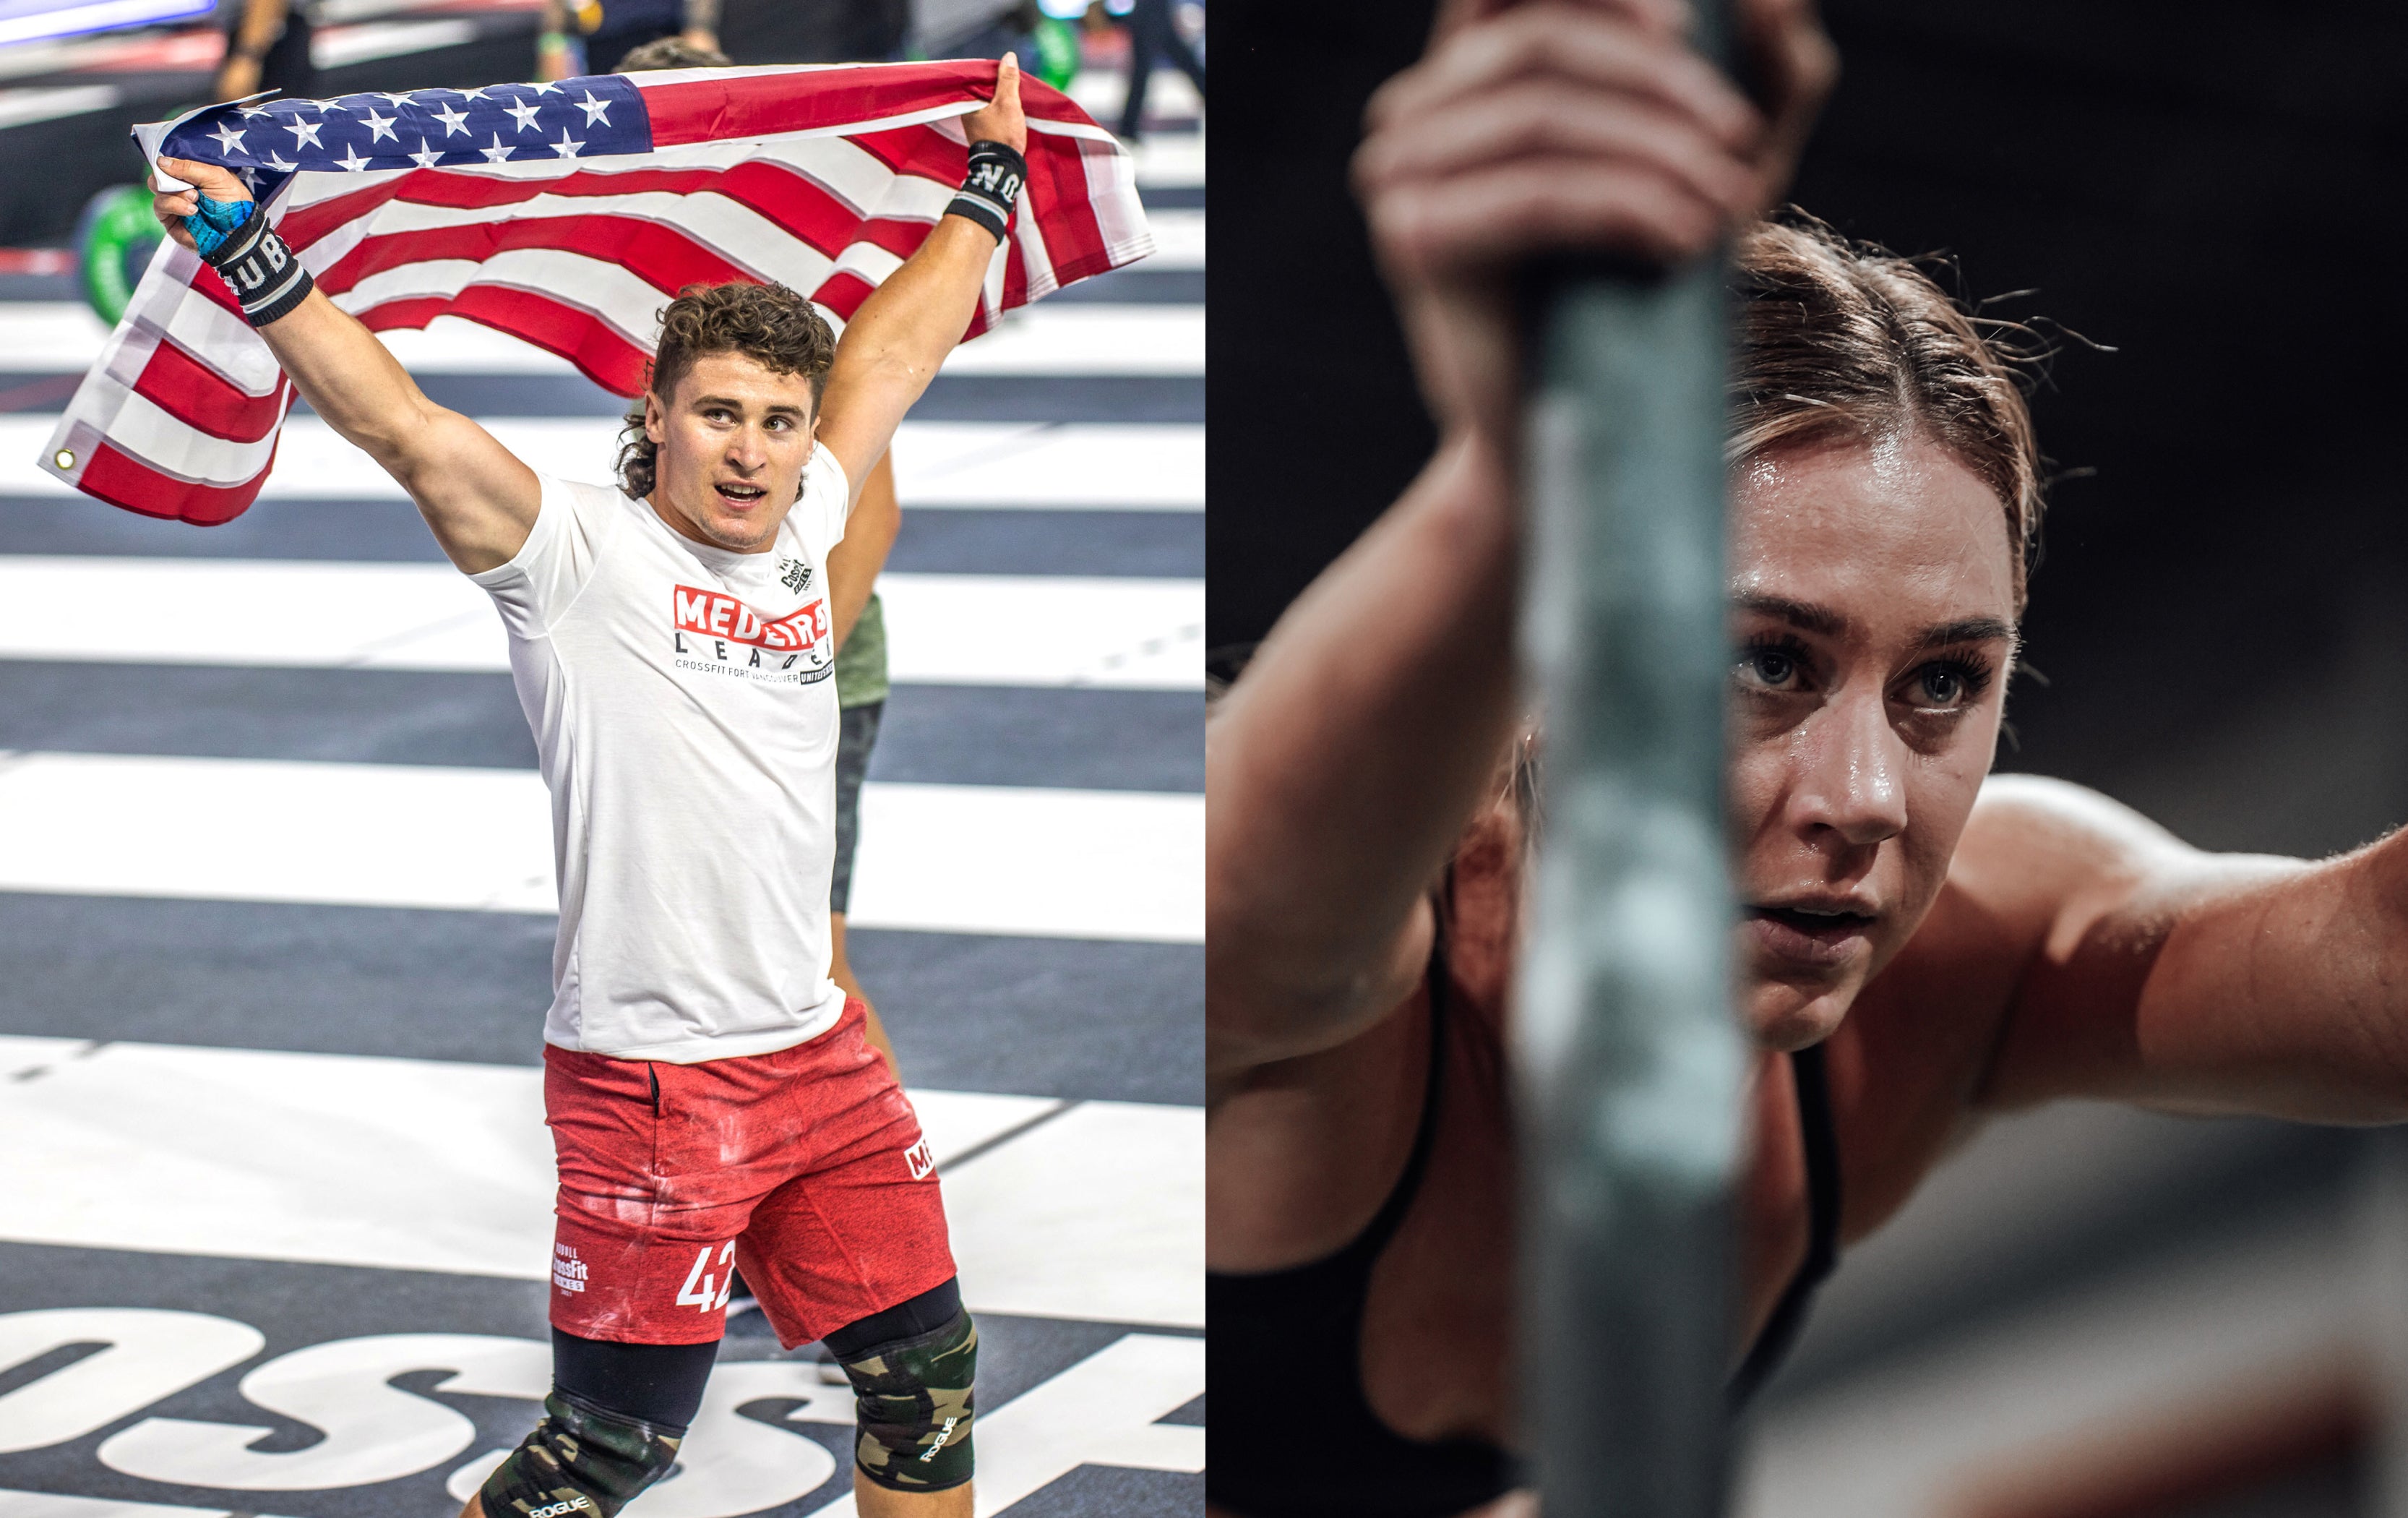 Justin Medeiros and Brooke Wells